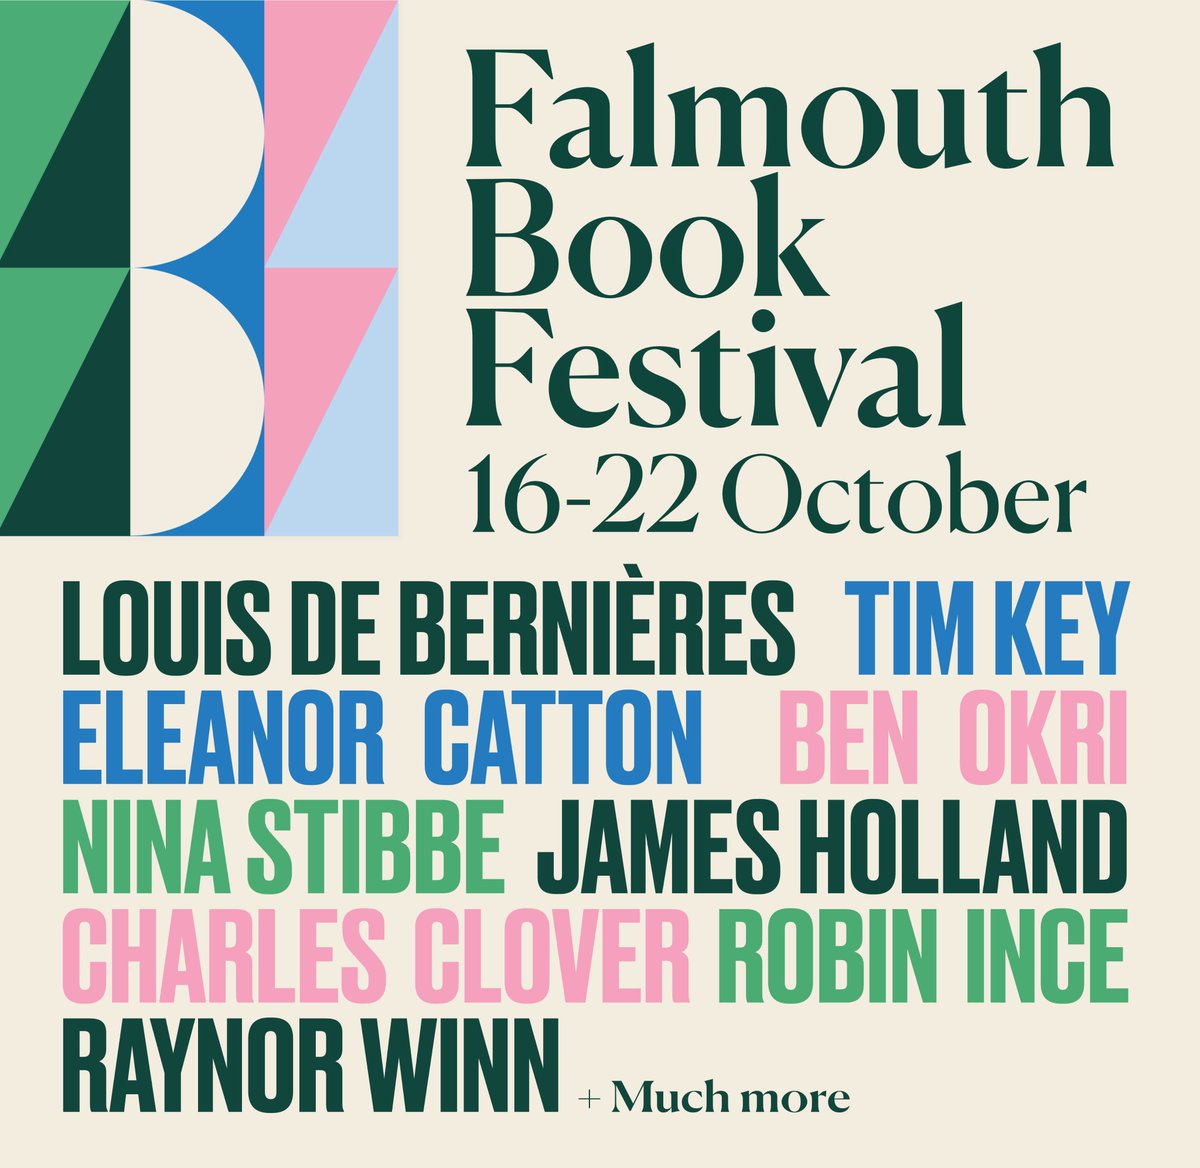 It's 10 days until our festival starts, and we can't wait to welcome all our amazing authors, including @robinince, @benokri, @James1940, @CRHClover, @ninastibbe, @timkeyperson  and @raynor_winn. Please come and join them from 16-22 Oct! #lovefalmouth #cornwall  #festival #books